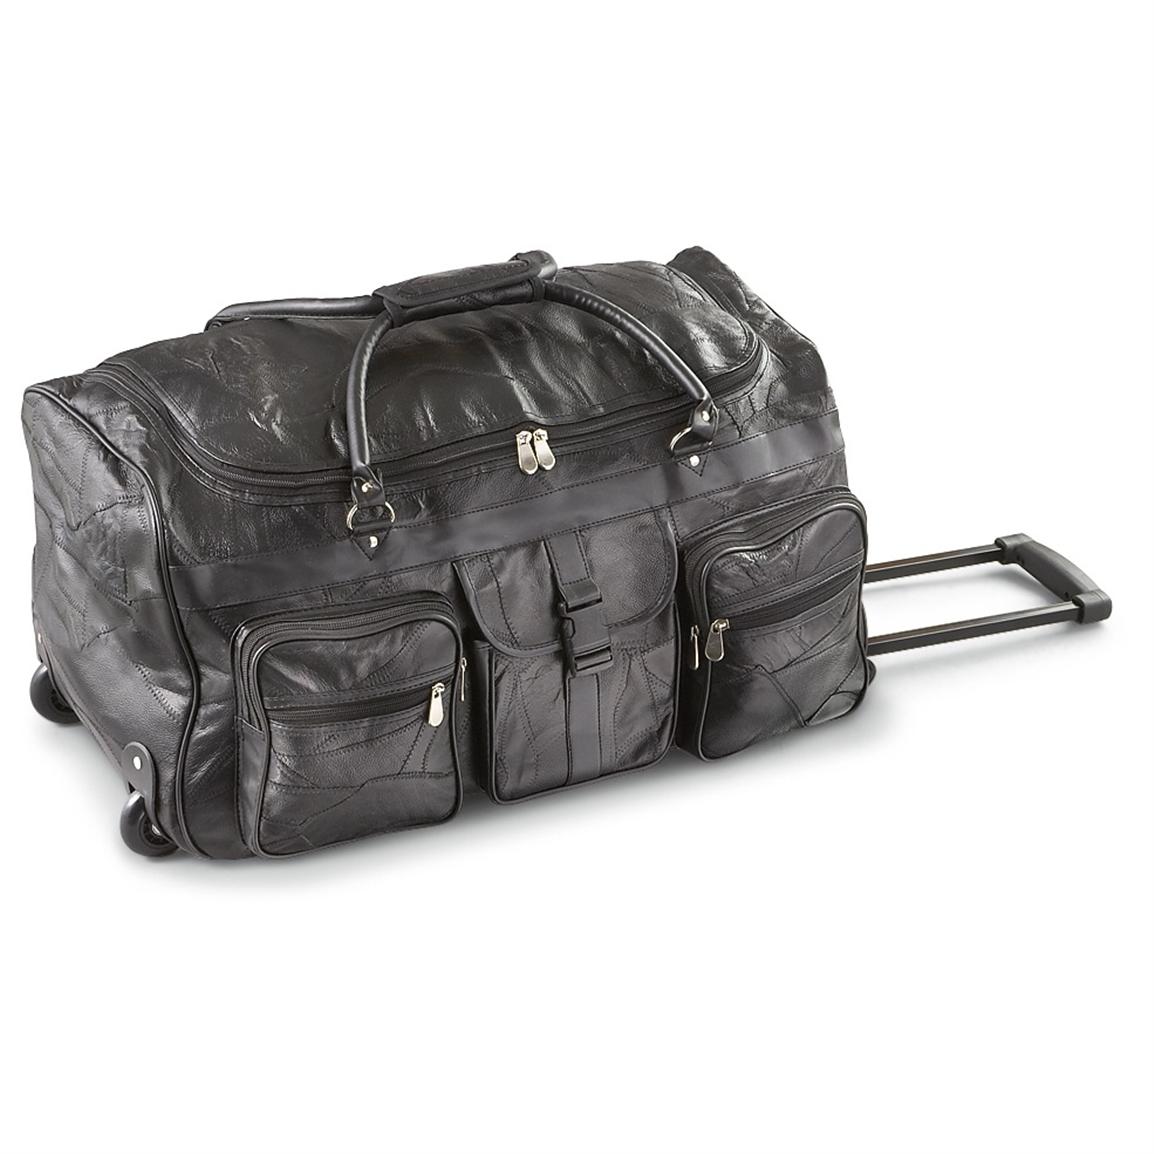 Wheeled Leather Duffel Bag, Black - 203757, at Sportsman&#39;s Guide